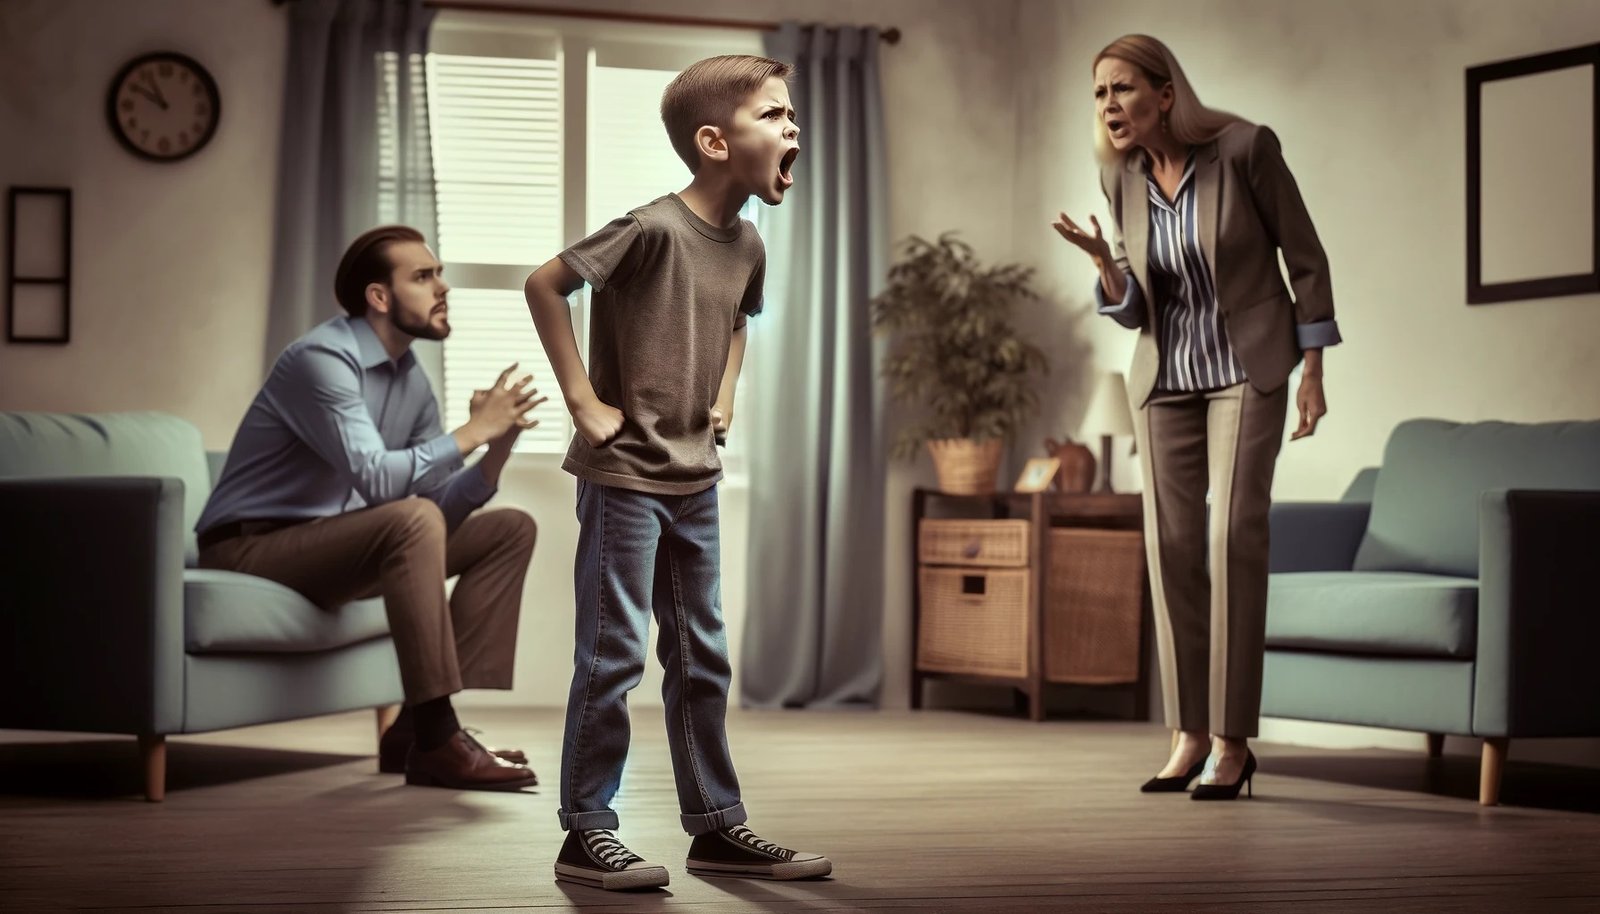 A young boy shouting defiantly at his parents while standing in the living room.